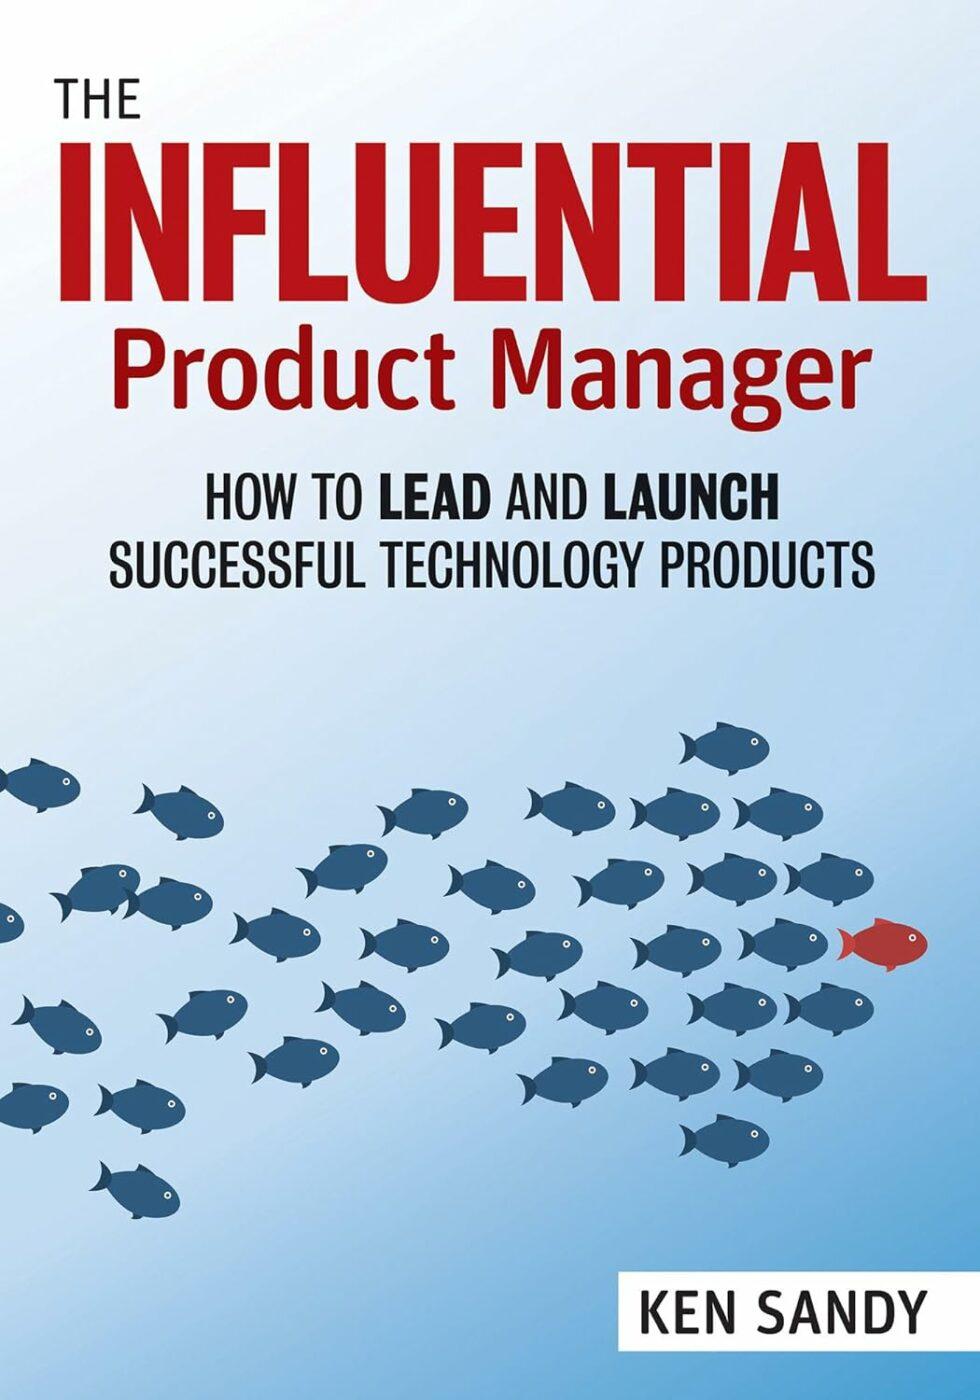 The Influential Product Manager by Ken Sandy